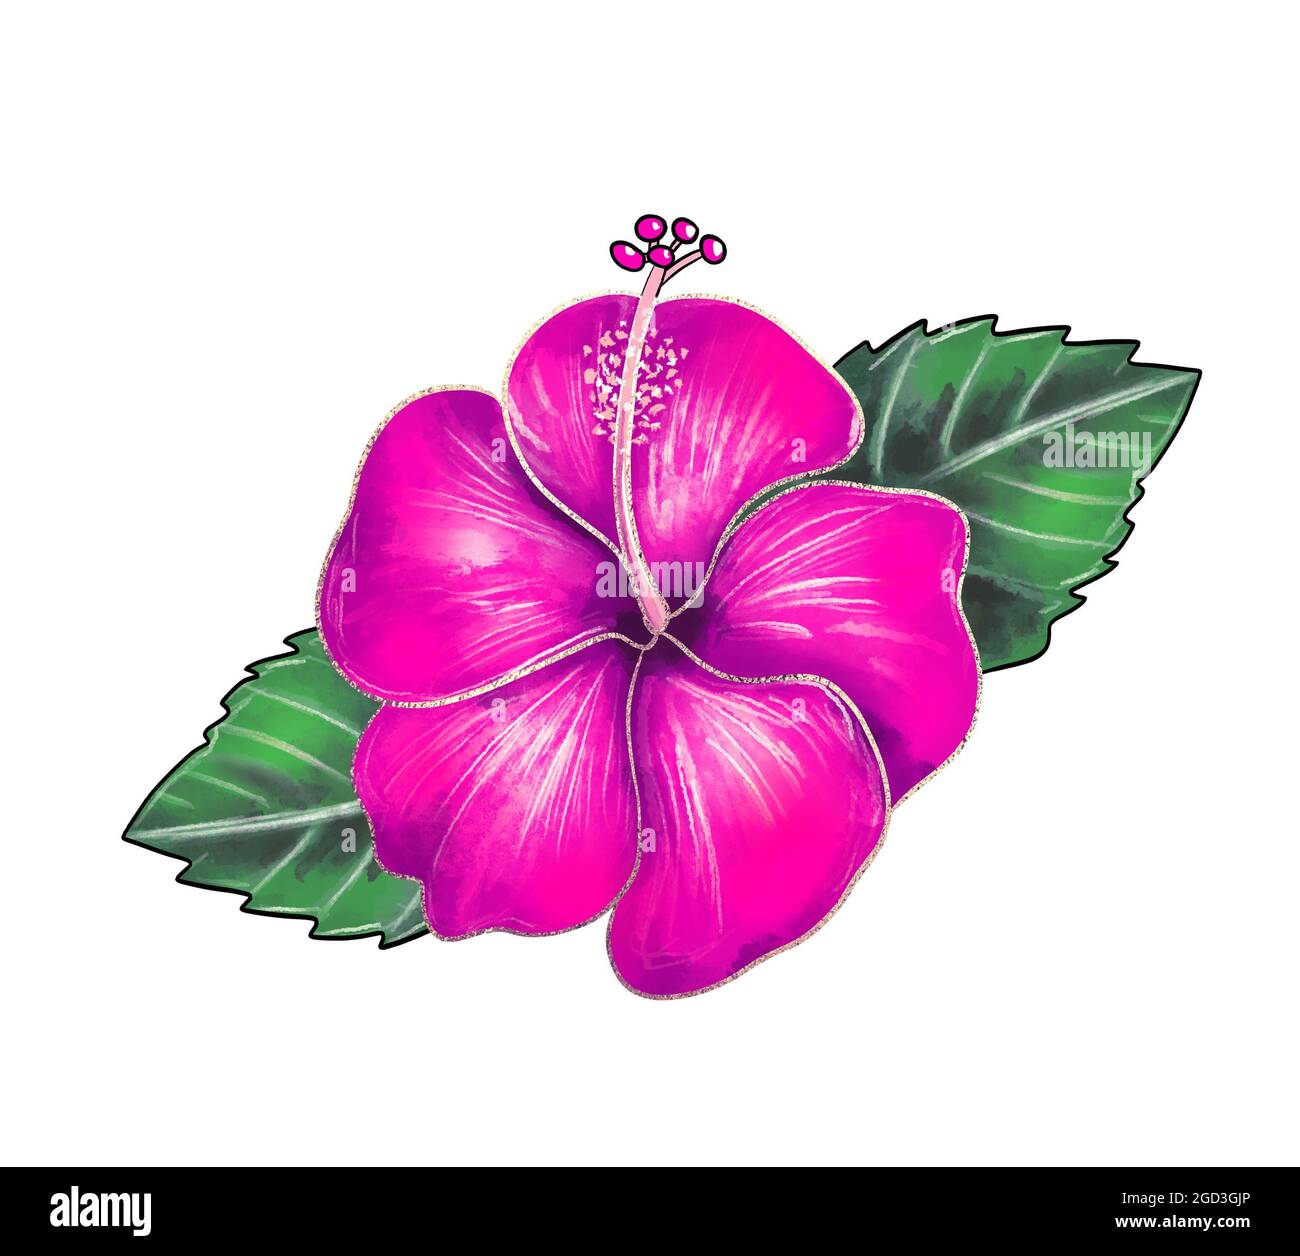 Illustration of a colored drawing of hibiscus flower close up of ...